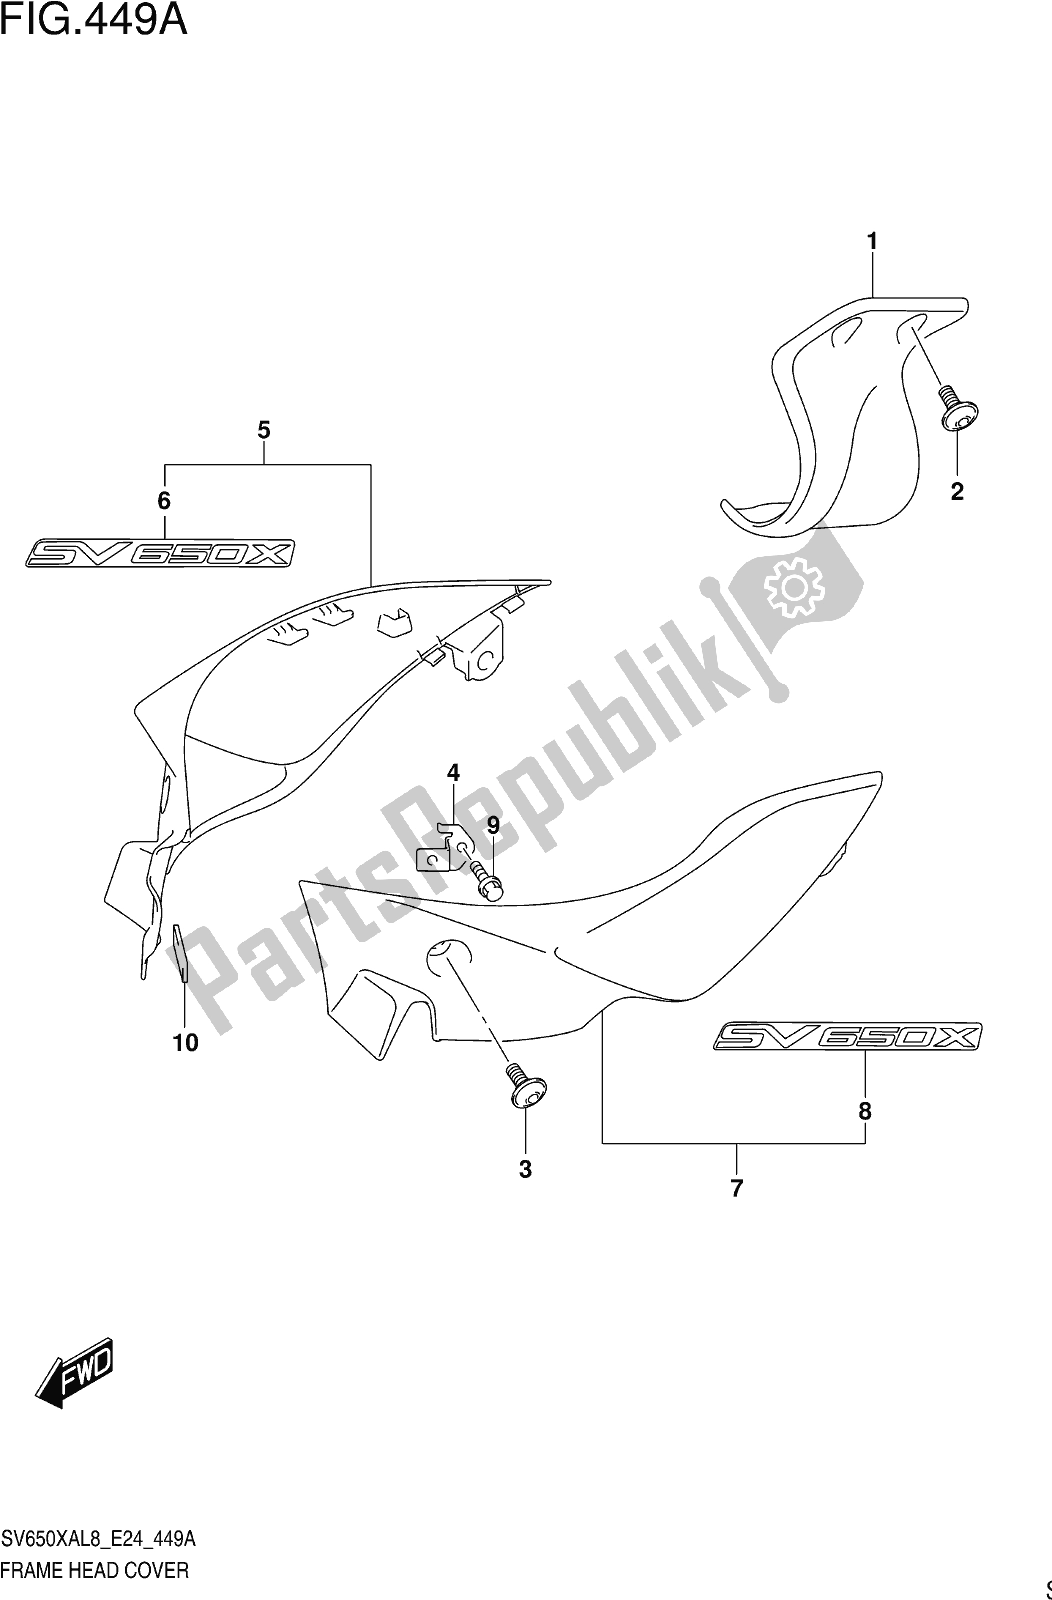 All parts for the Fig. 449a Frame Head Cover of the Suzuki SV 650 XA 2018